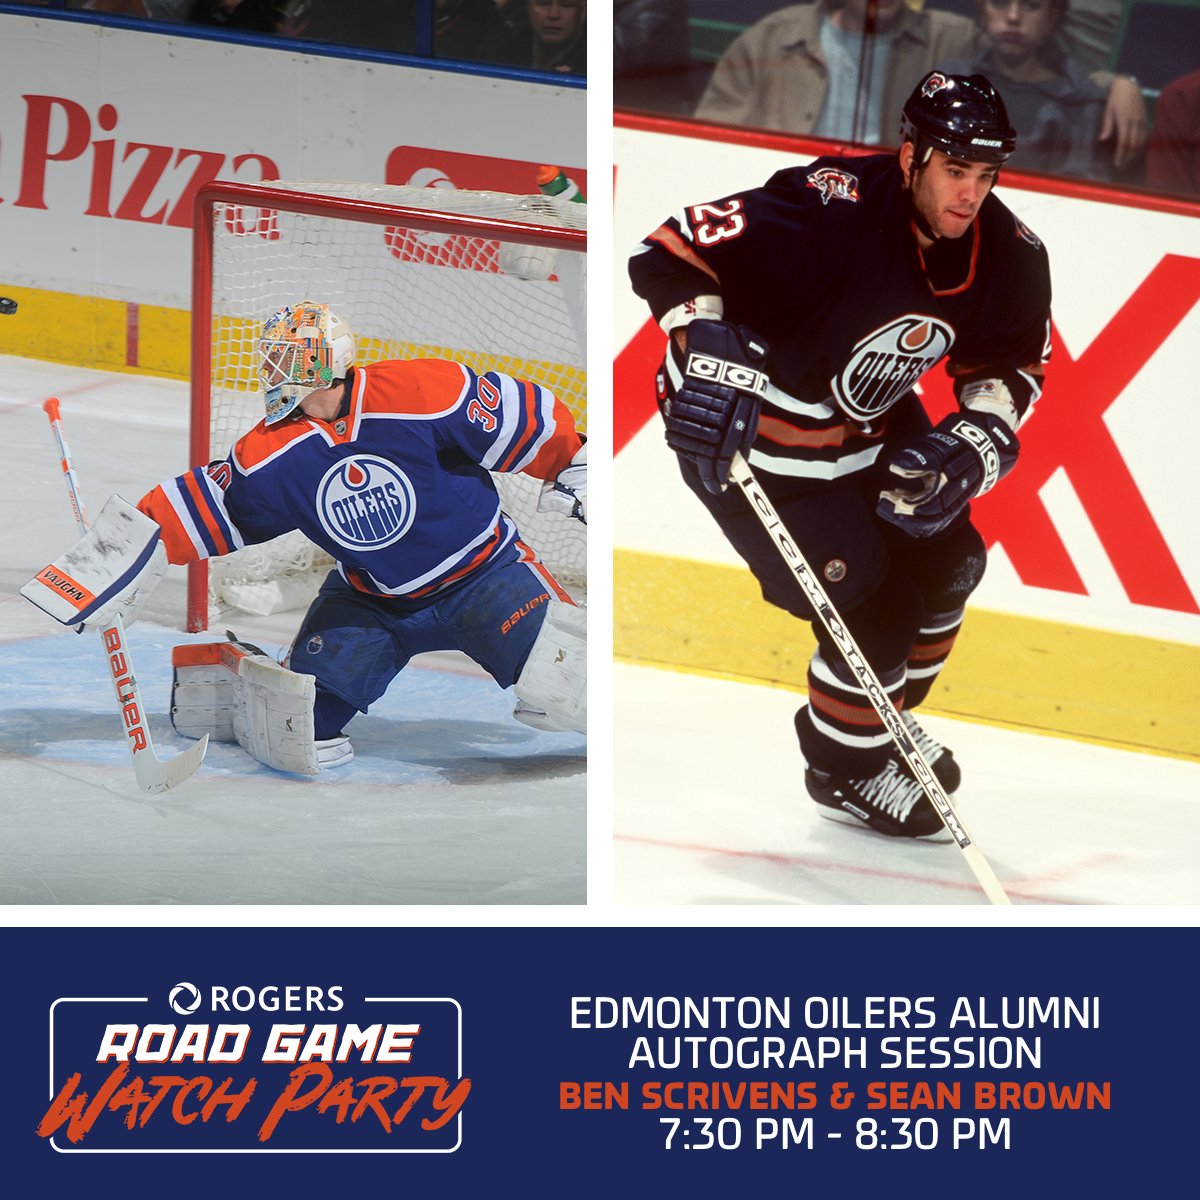 ✍️ ALUMNI UPDATE!! ✍️ Edmonton Oilers alumni Ben Scrivens & Sean Brown will be signing autographs at tomorrow's @Rogers Road Game Watch Party! Limited tickets remain for Game 4, get yours now! 🎫: EdmontonOilers.com/WatchParty